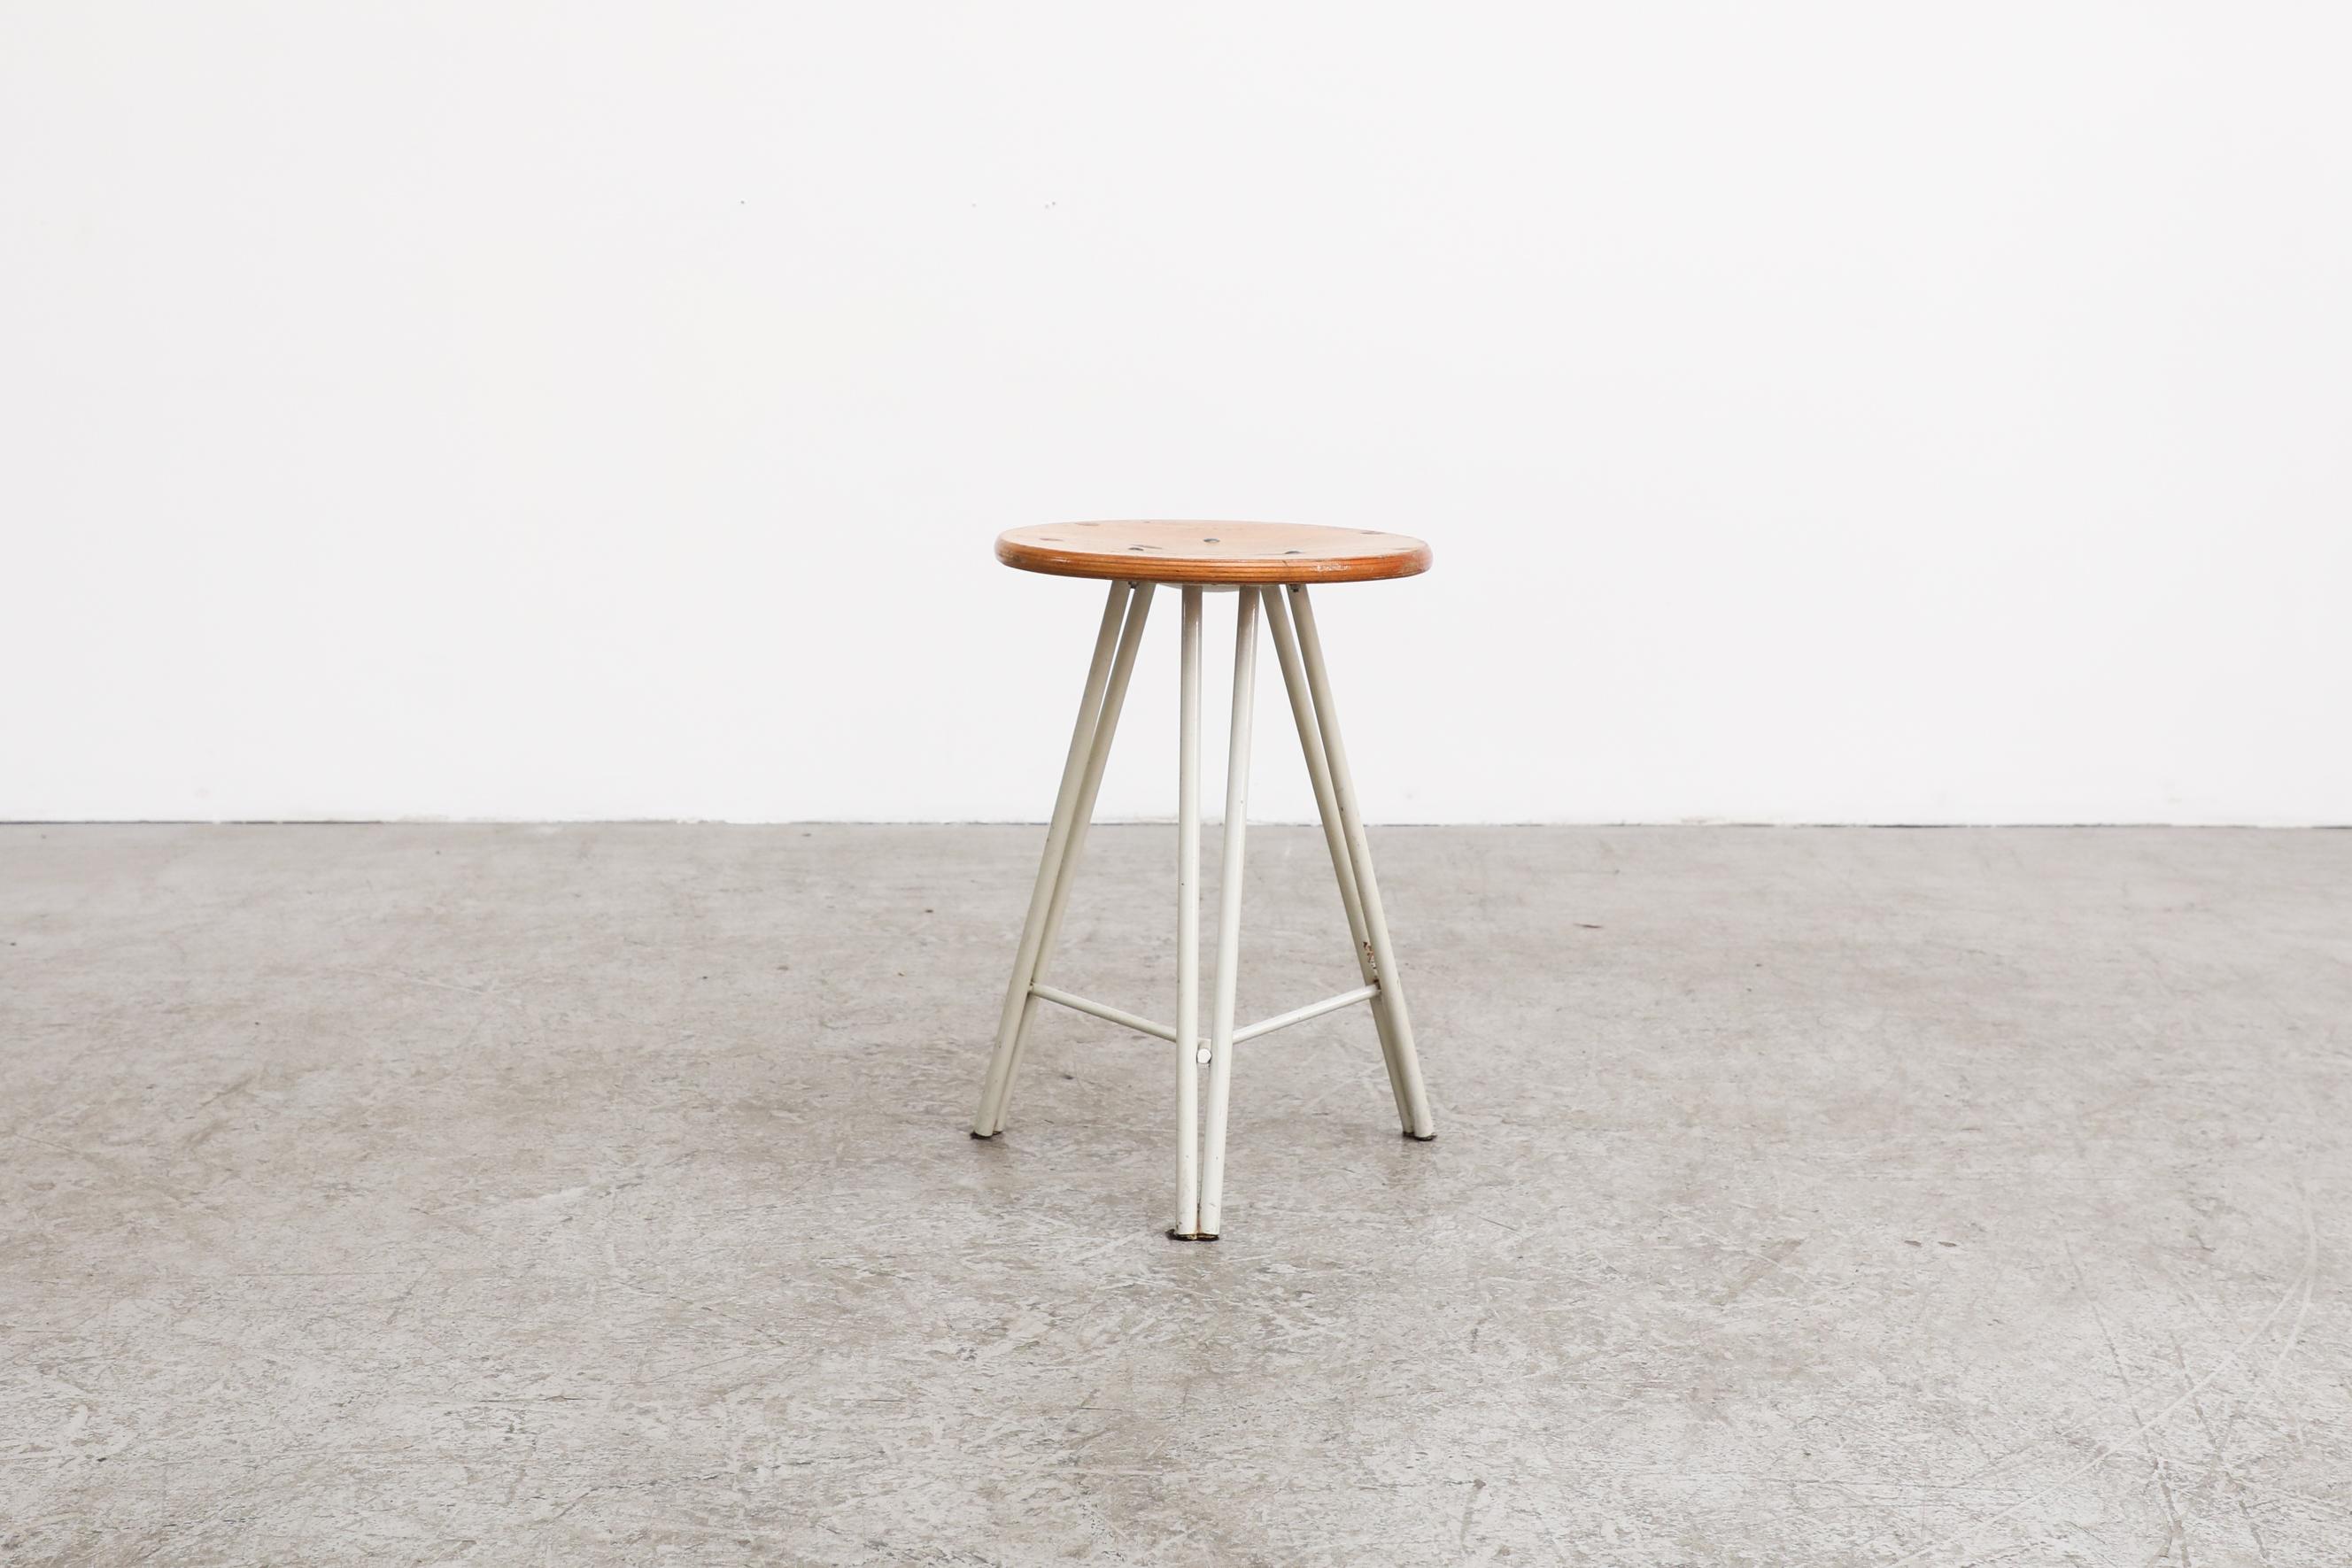 Enameled Vintage Pilastro Style Dutch Tripod Task Stool with White Legs and Wood Seat For Sale